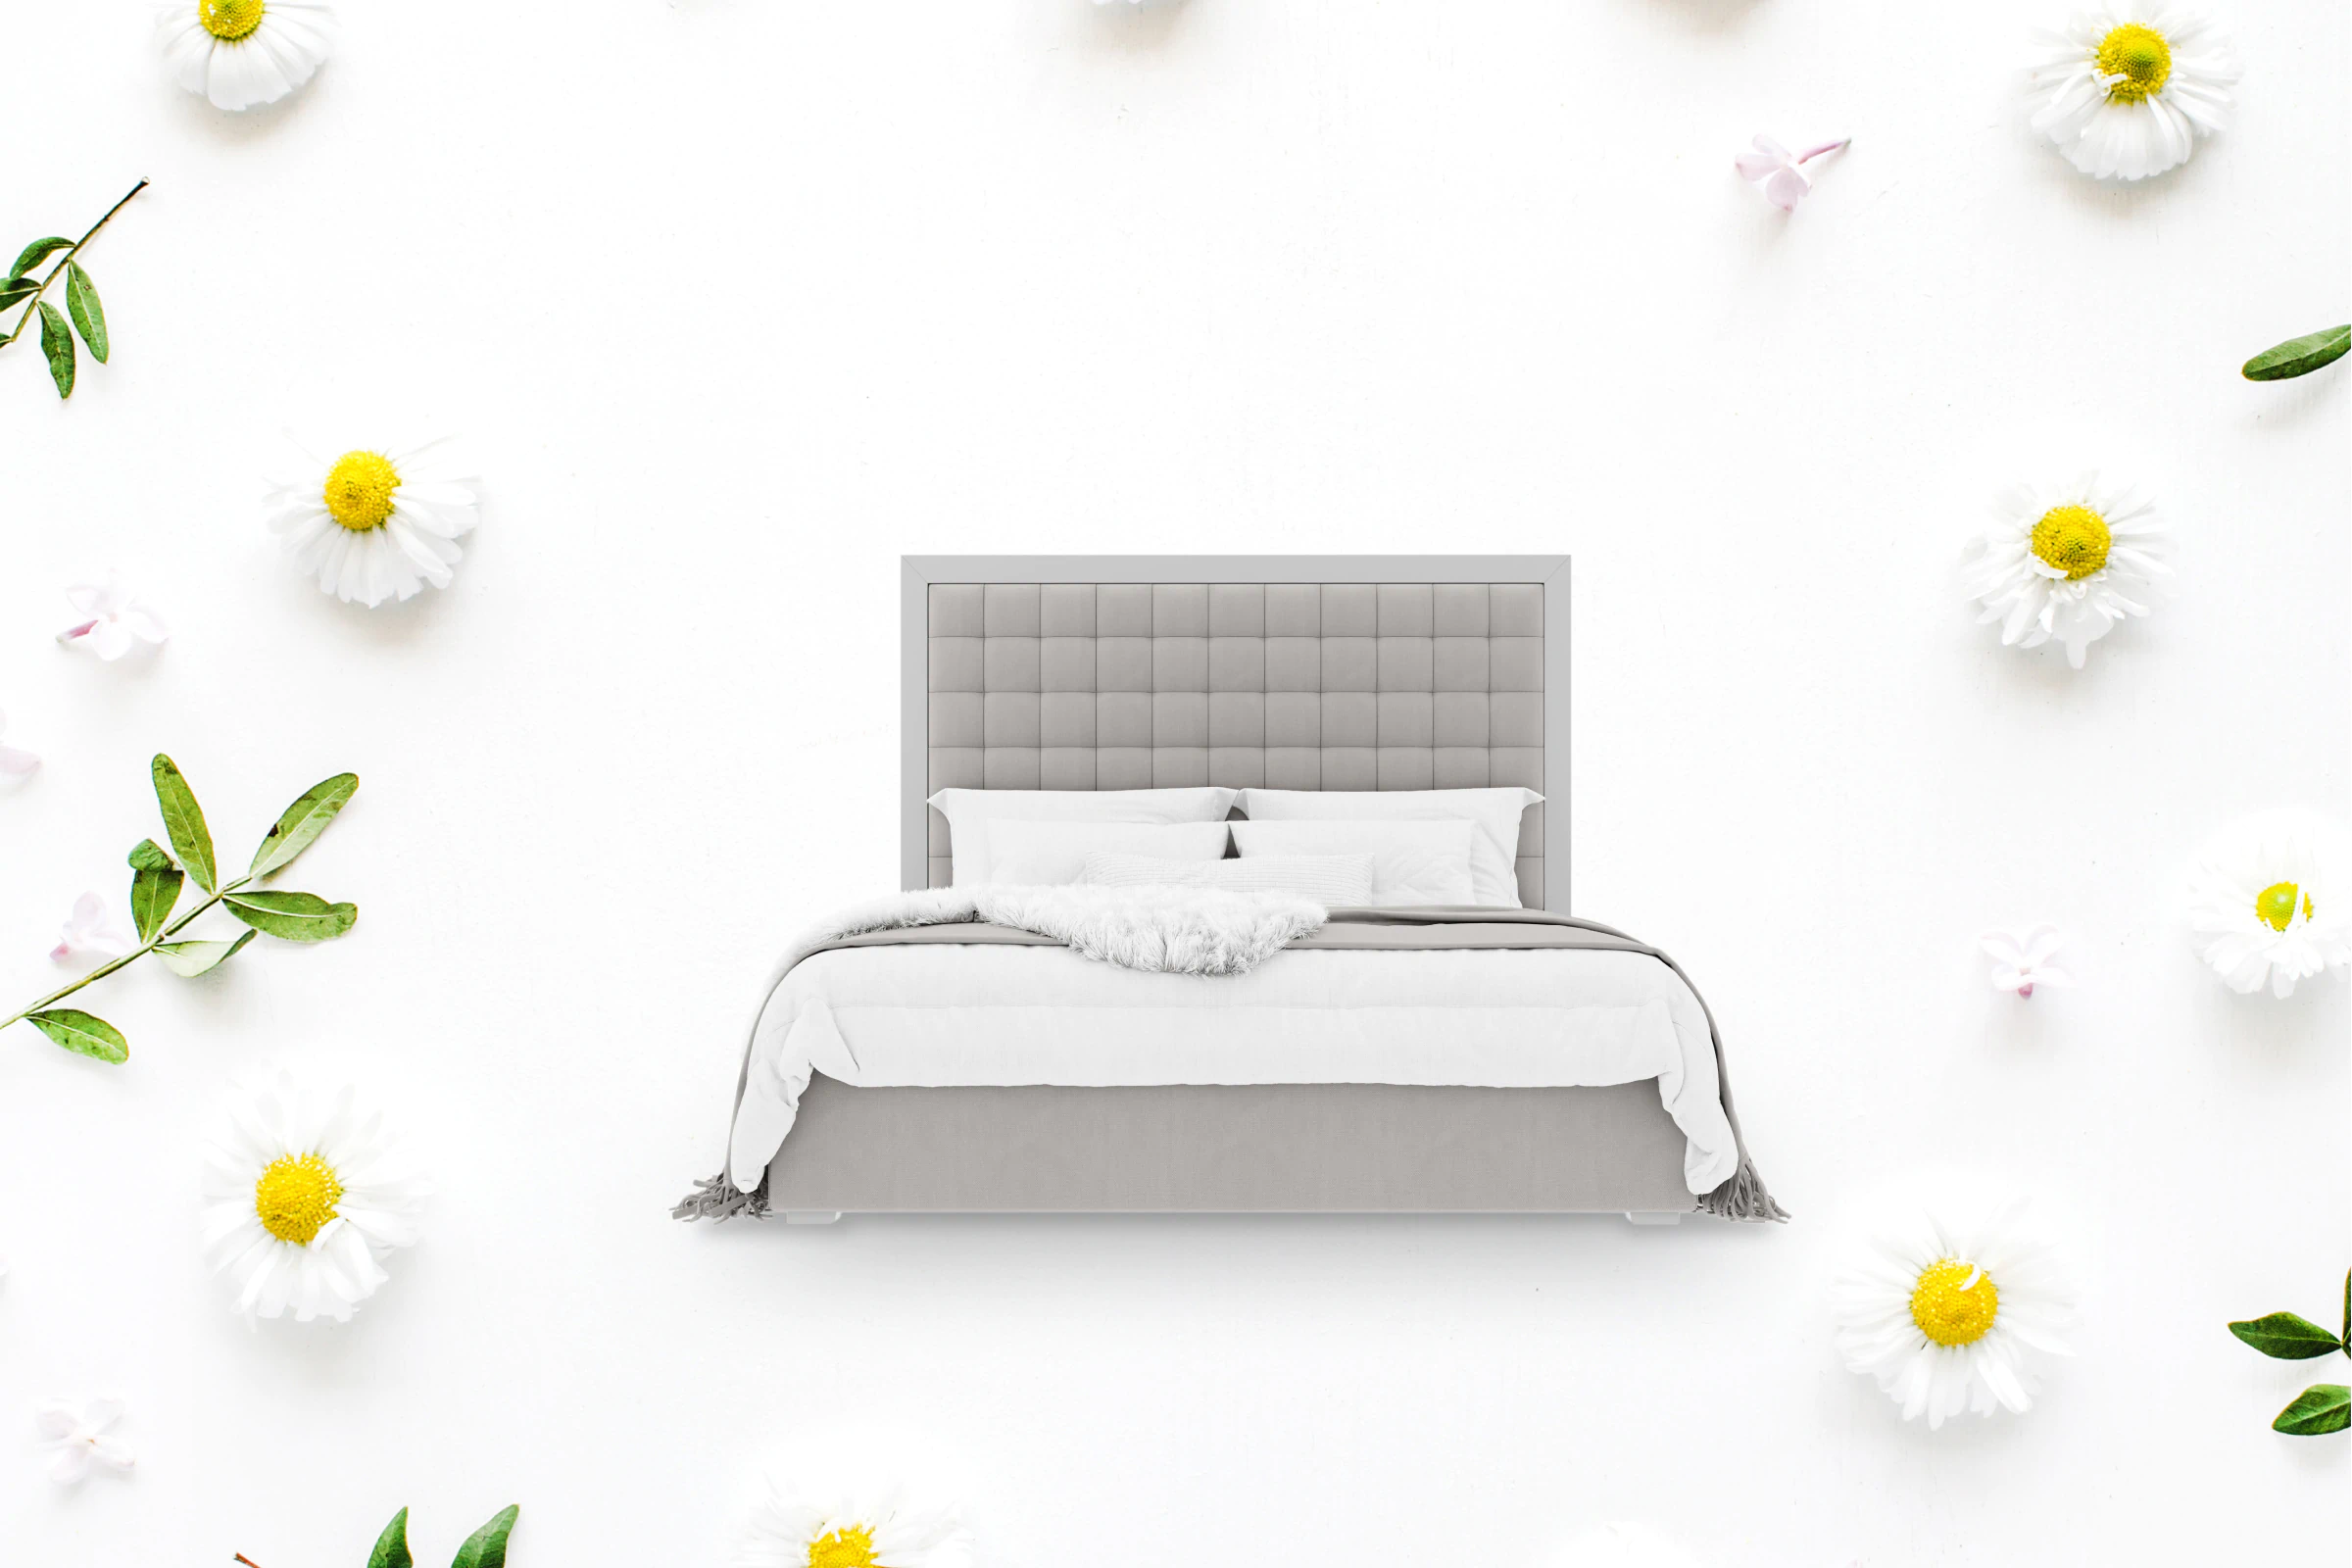 Spring flowers around a made bed